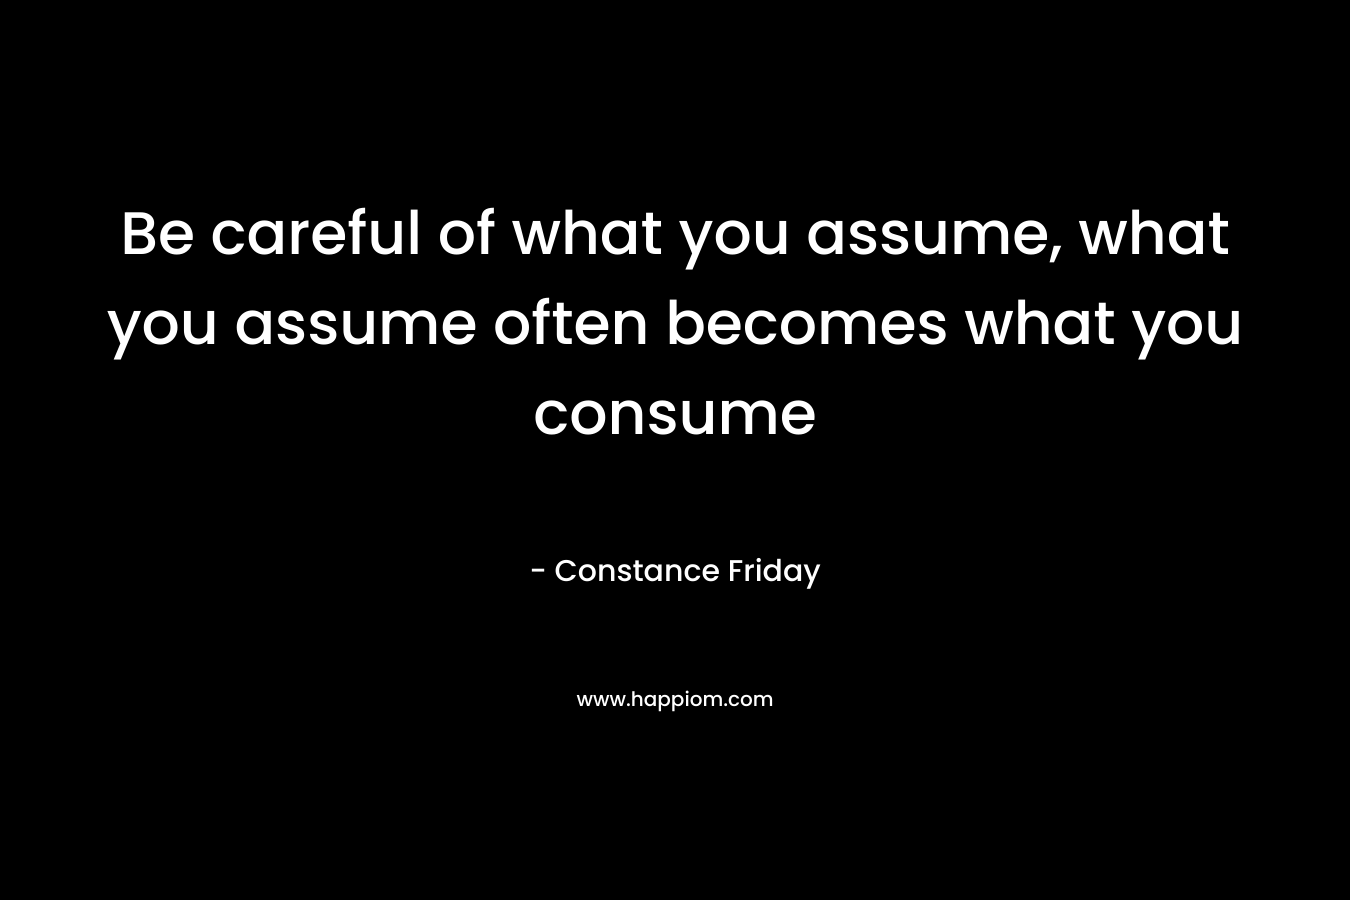 Be careful of what you assume, what you assume often becomes what you consume